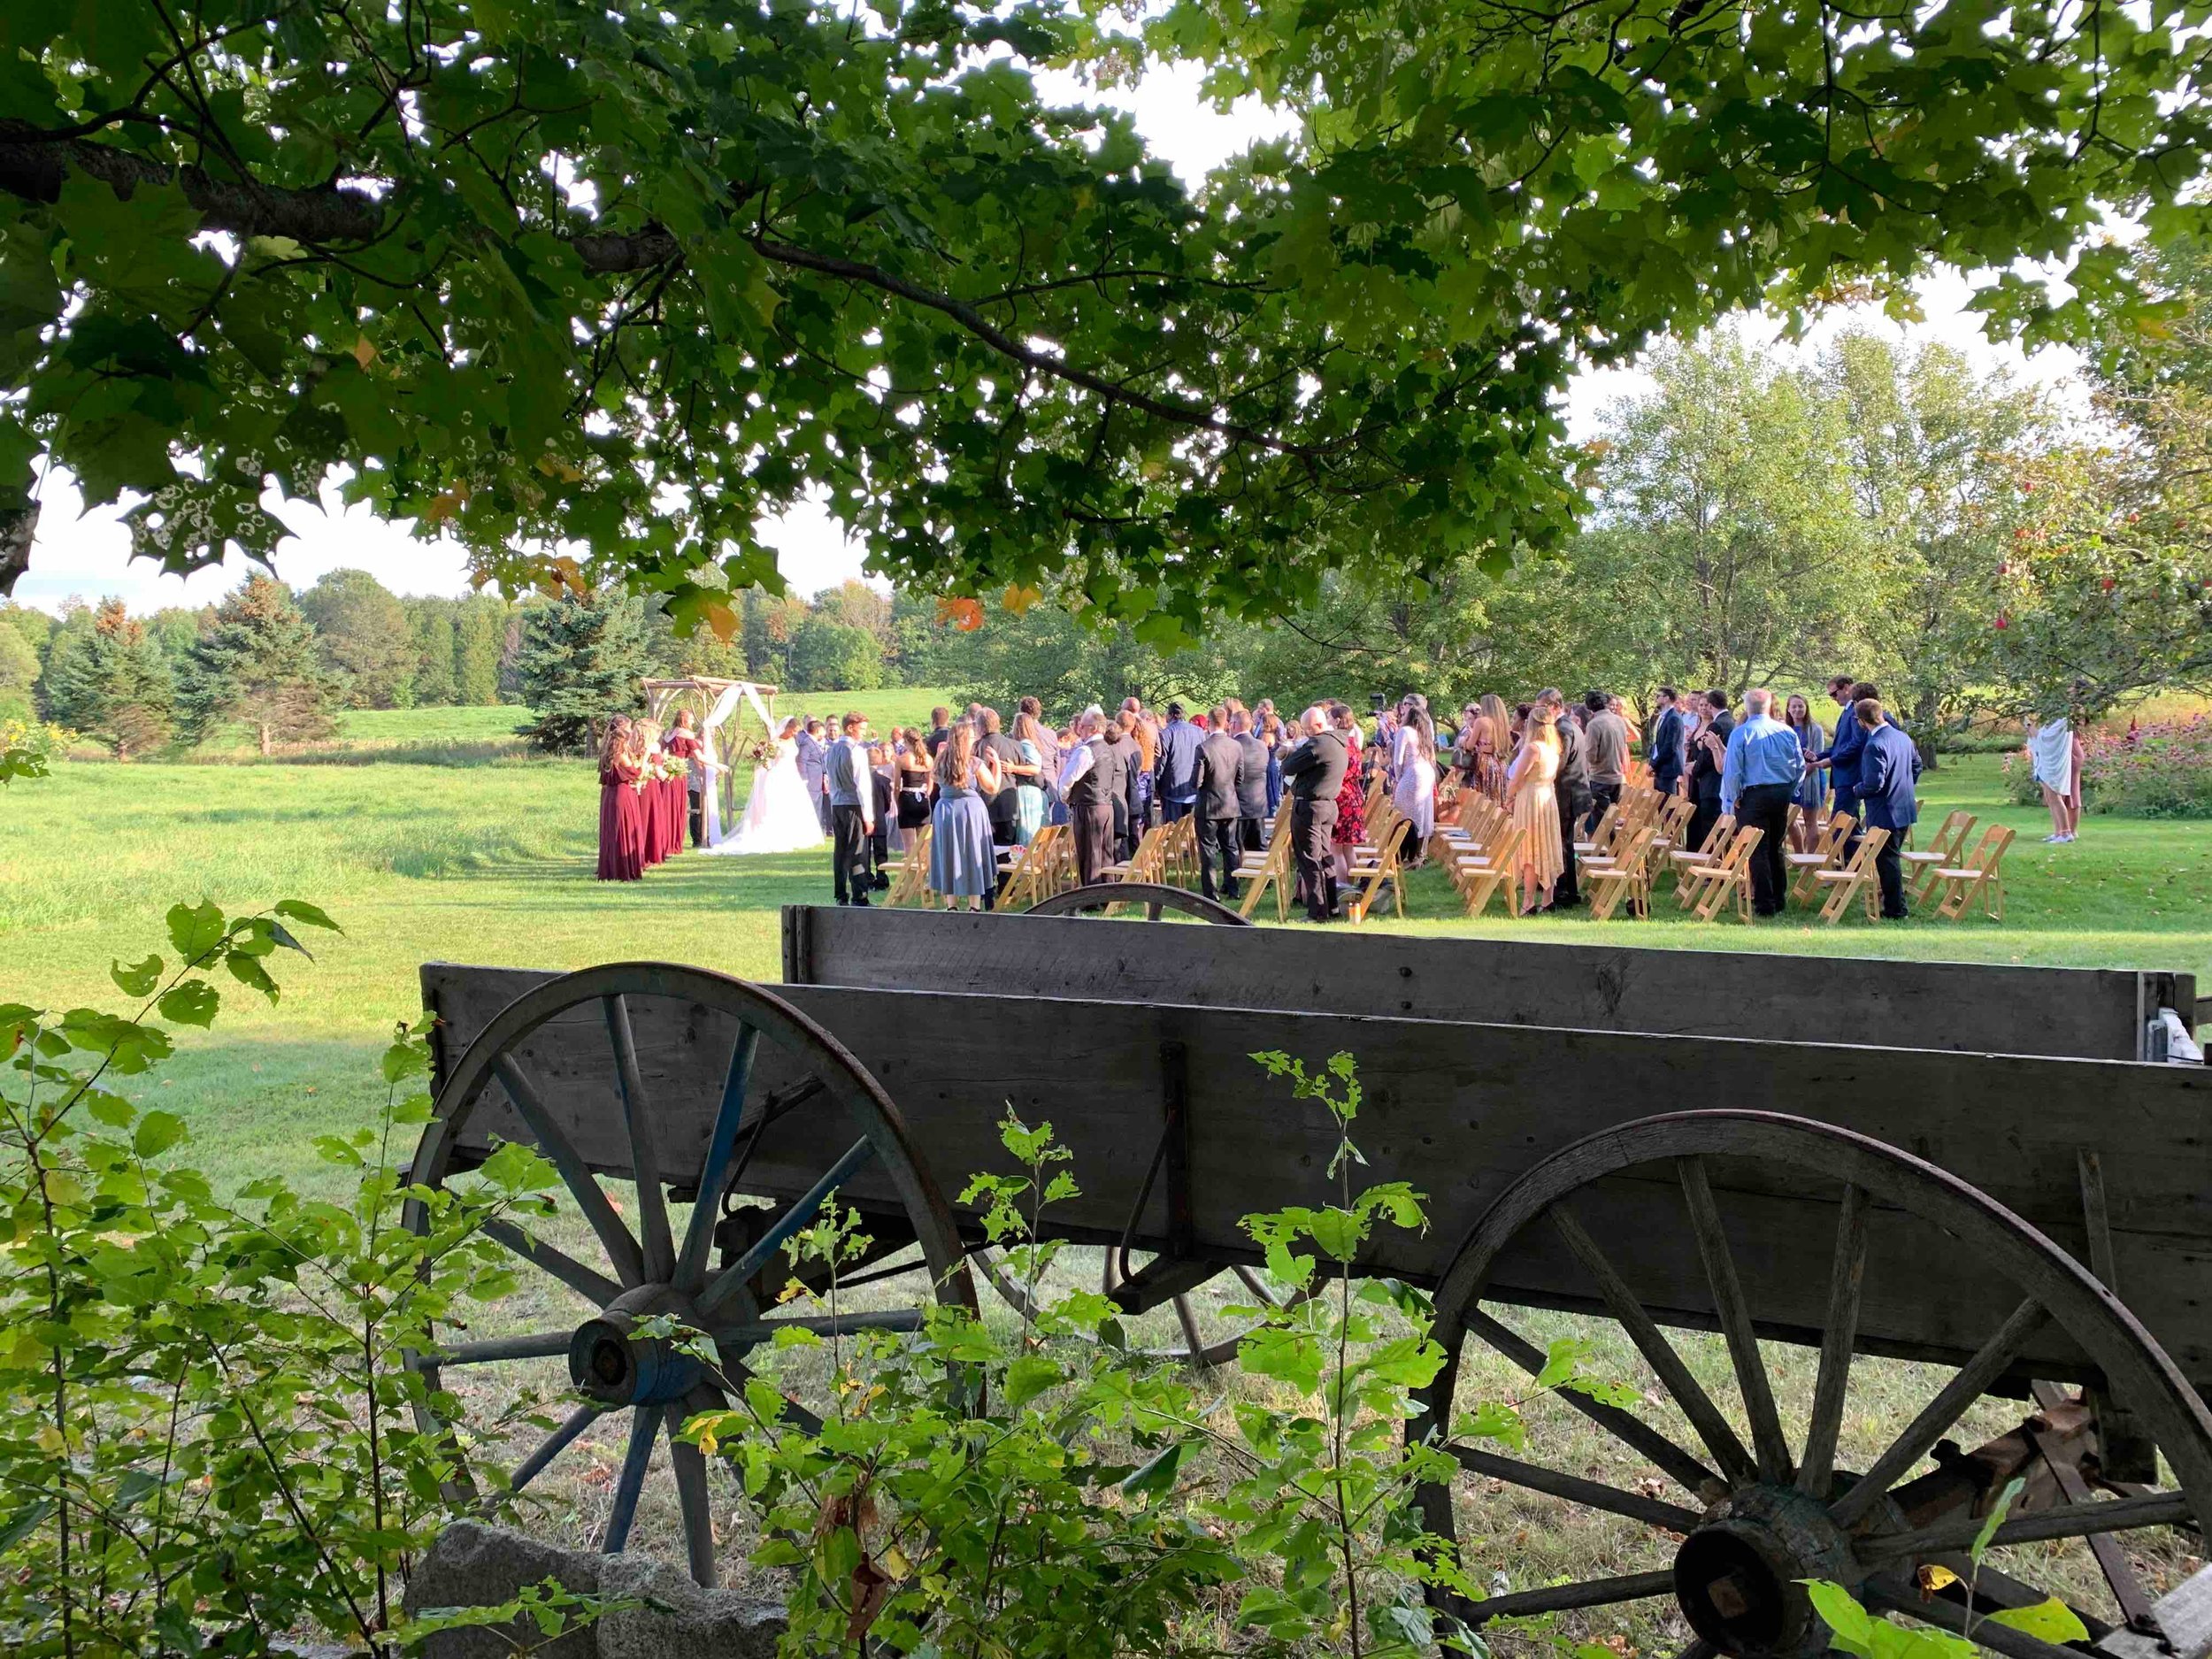 A wagon with a wedding ceremony taking place in the background on a summer day